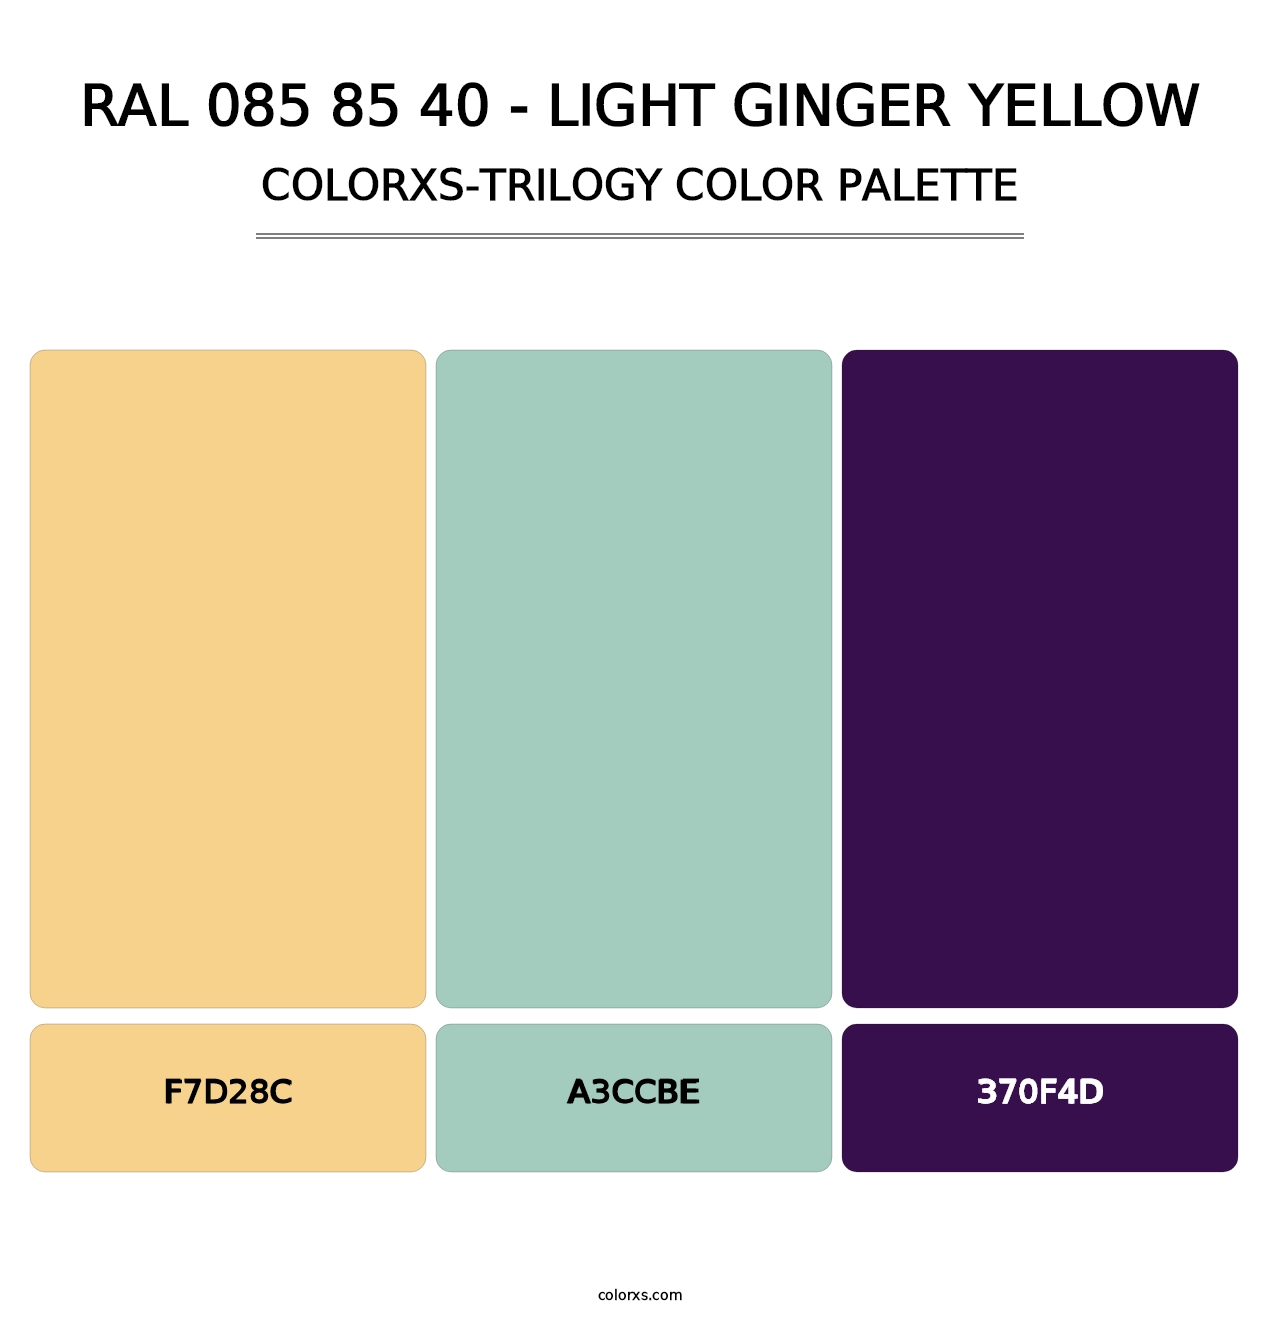 RAL 085 85 40 - Light Ginger Yellow - Colorxs Trilogy Palette